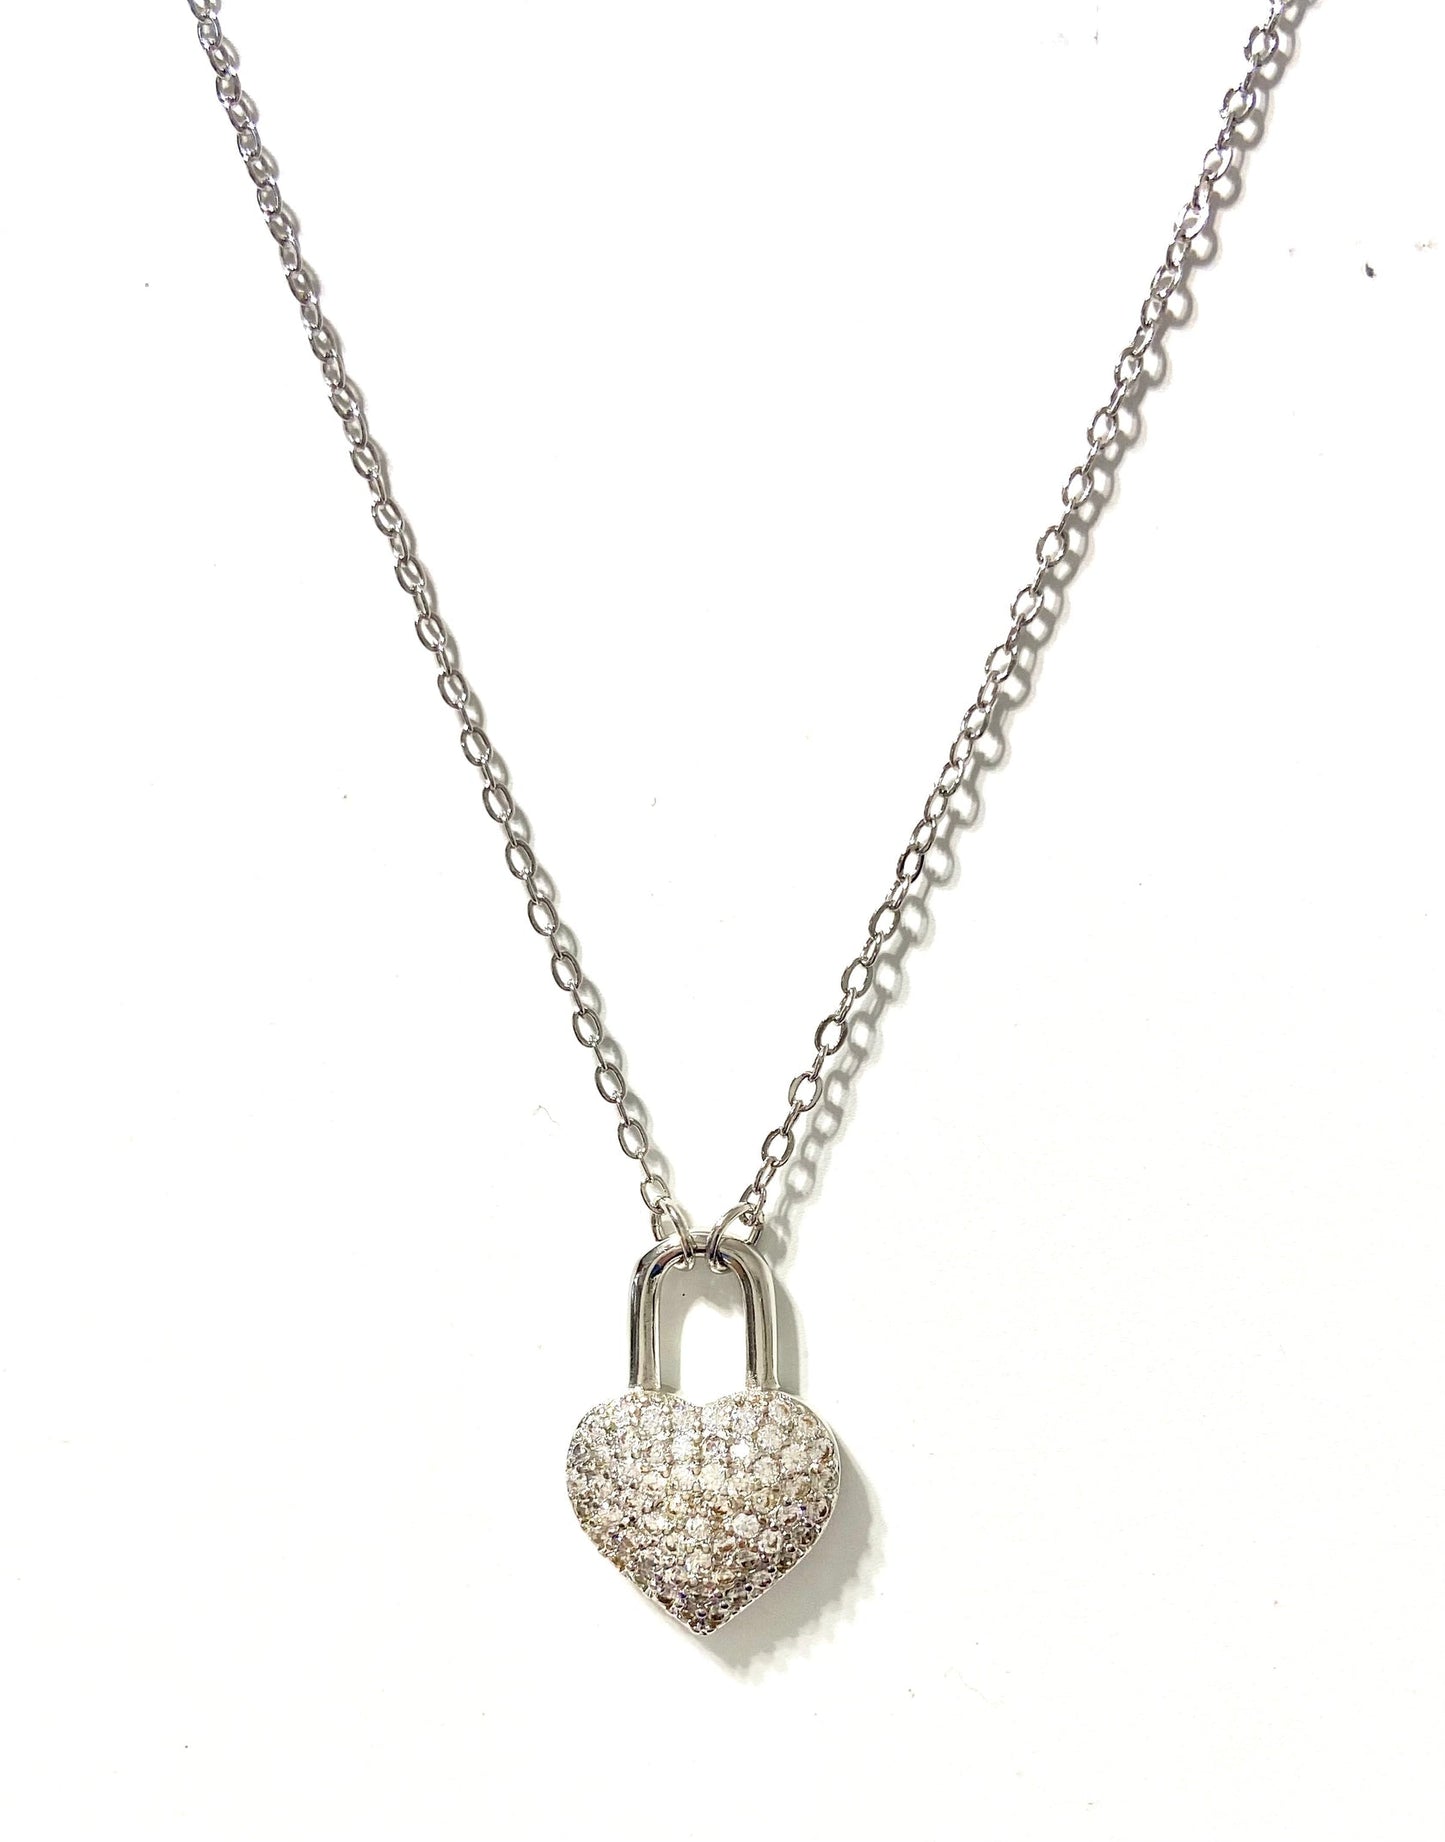 Say That You Love Me Lock Necklace